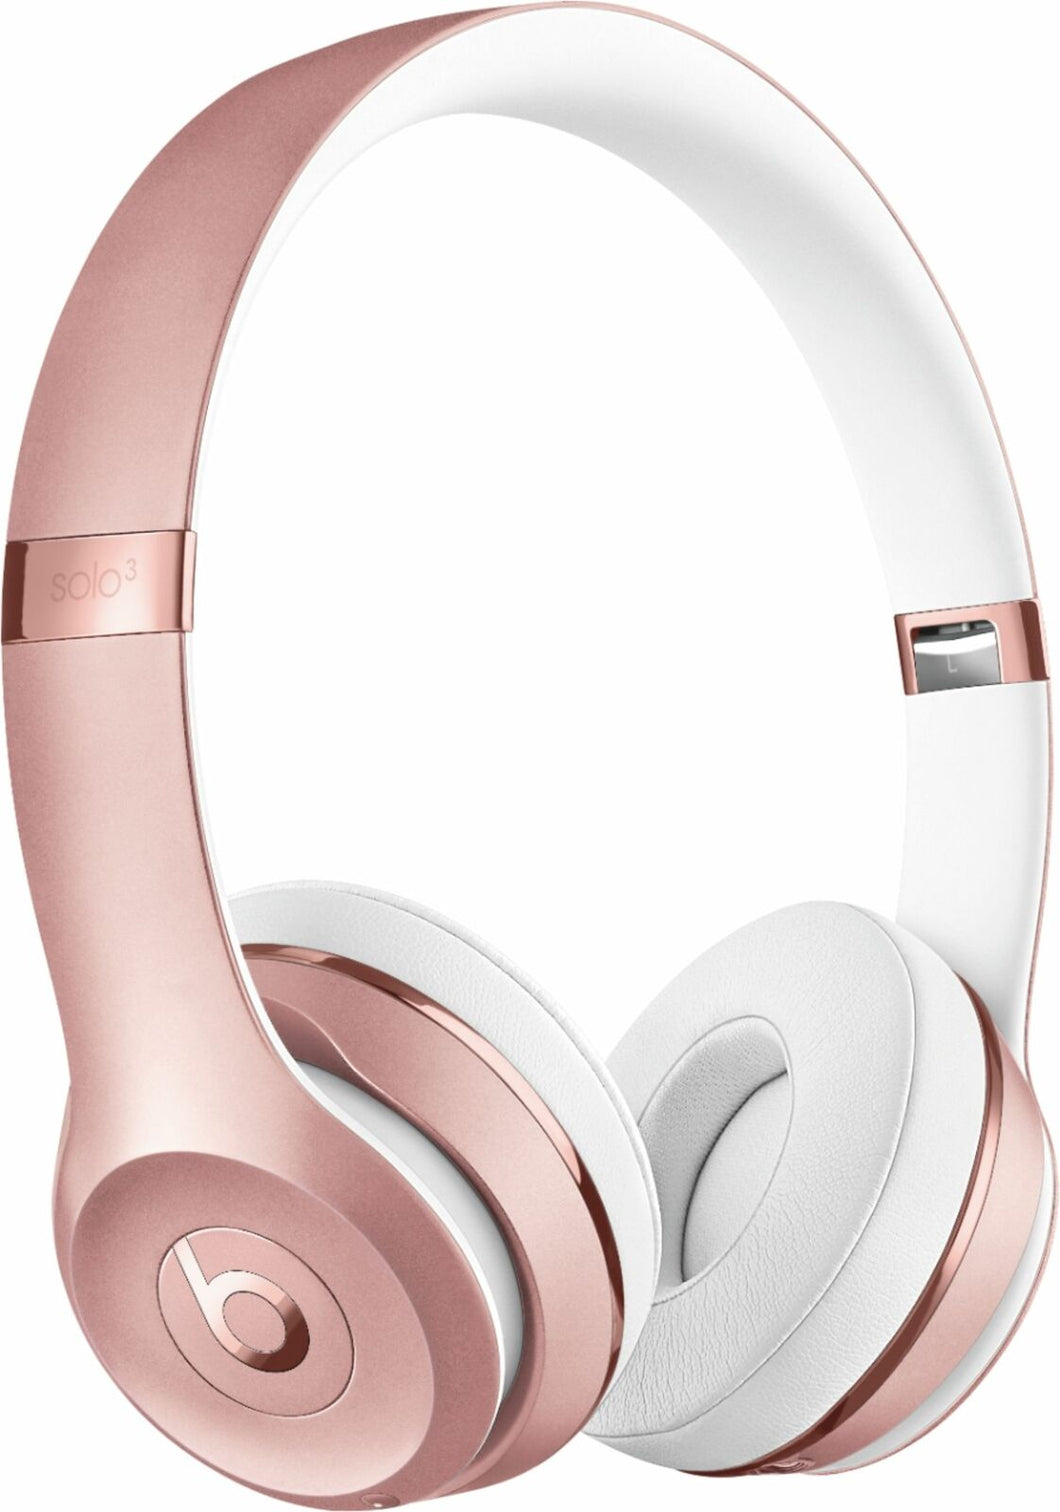 Beats by Dr. Dre Beats Solo3 Wireless On-Ear Headphones Rose Gold MX442LL/A